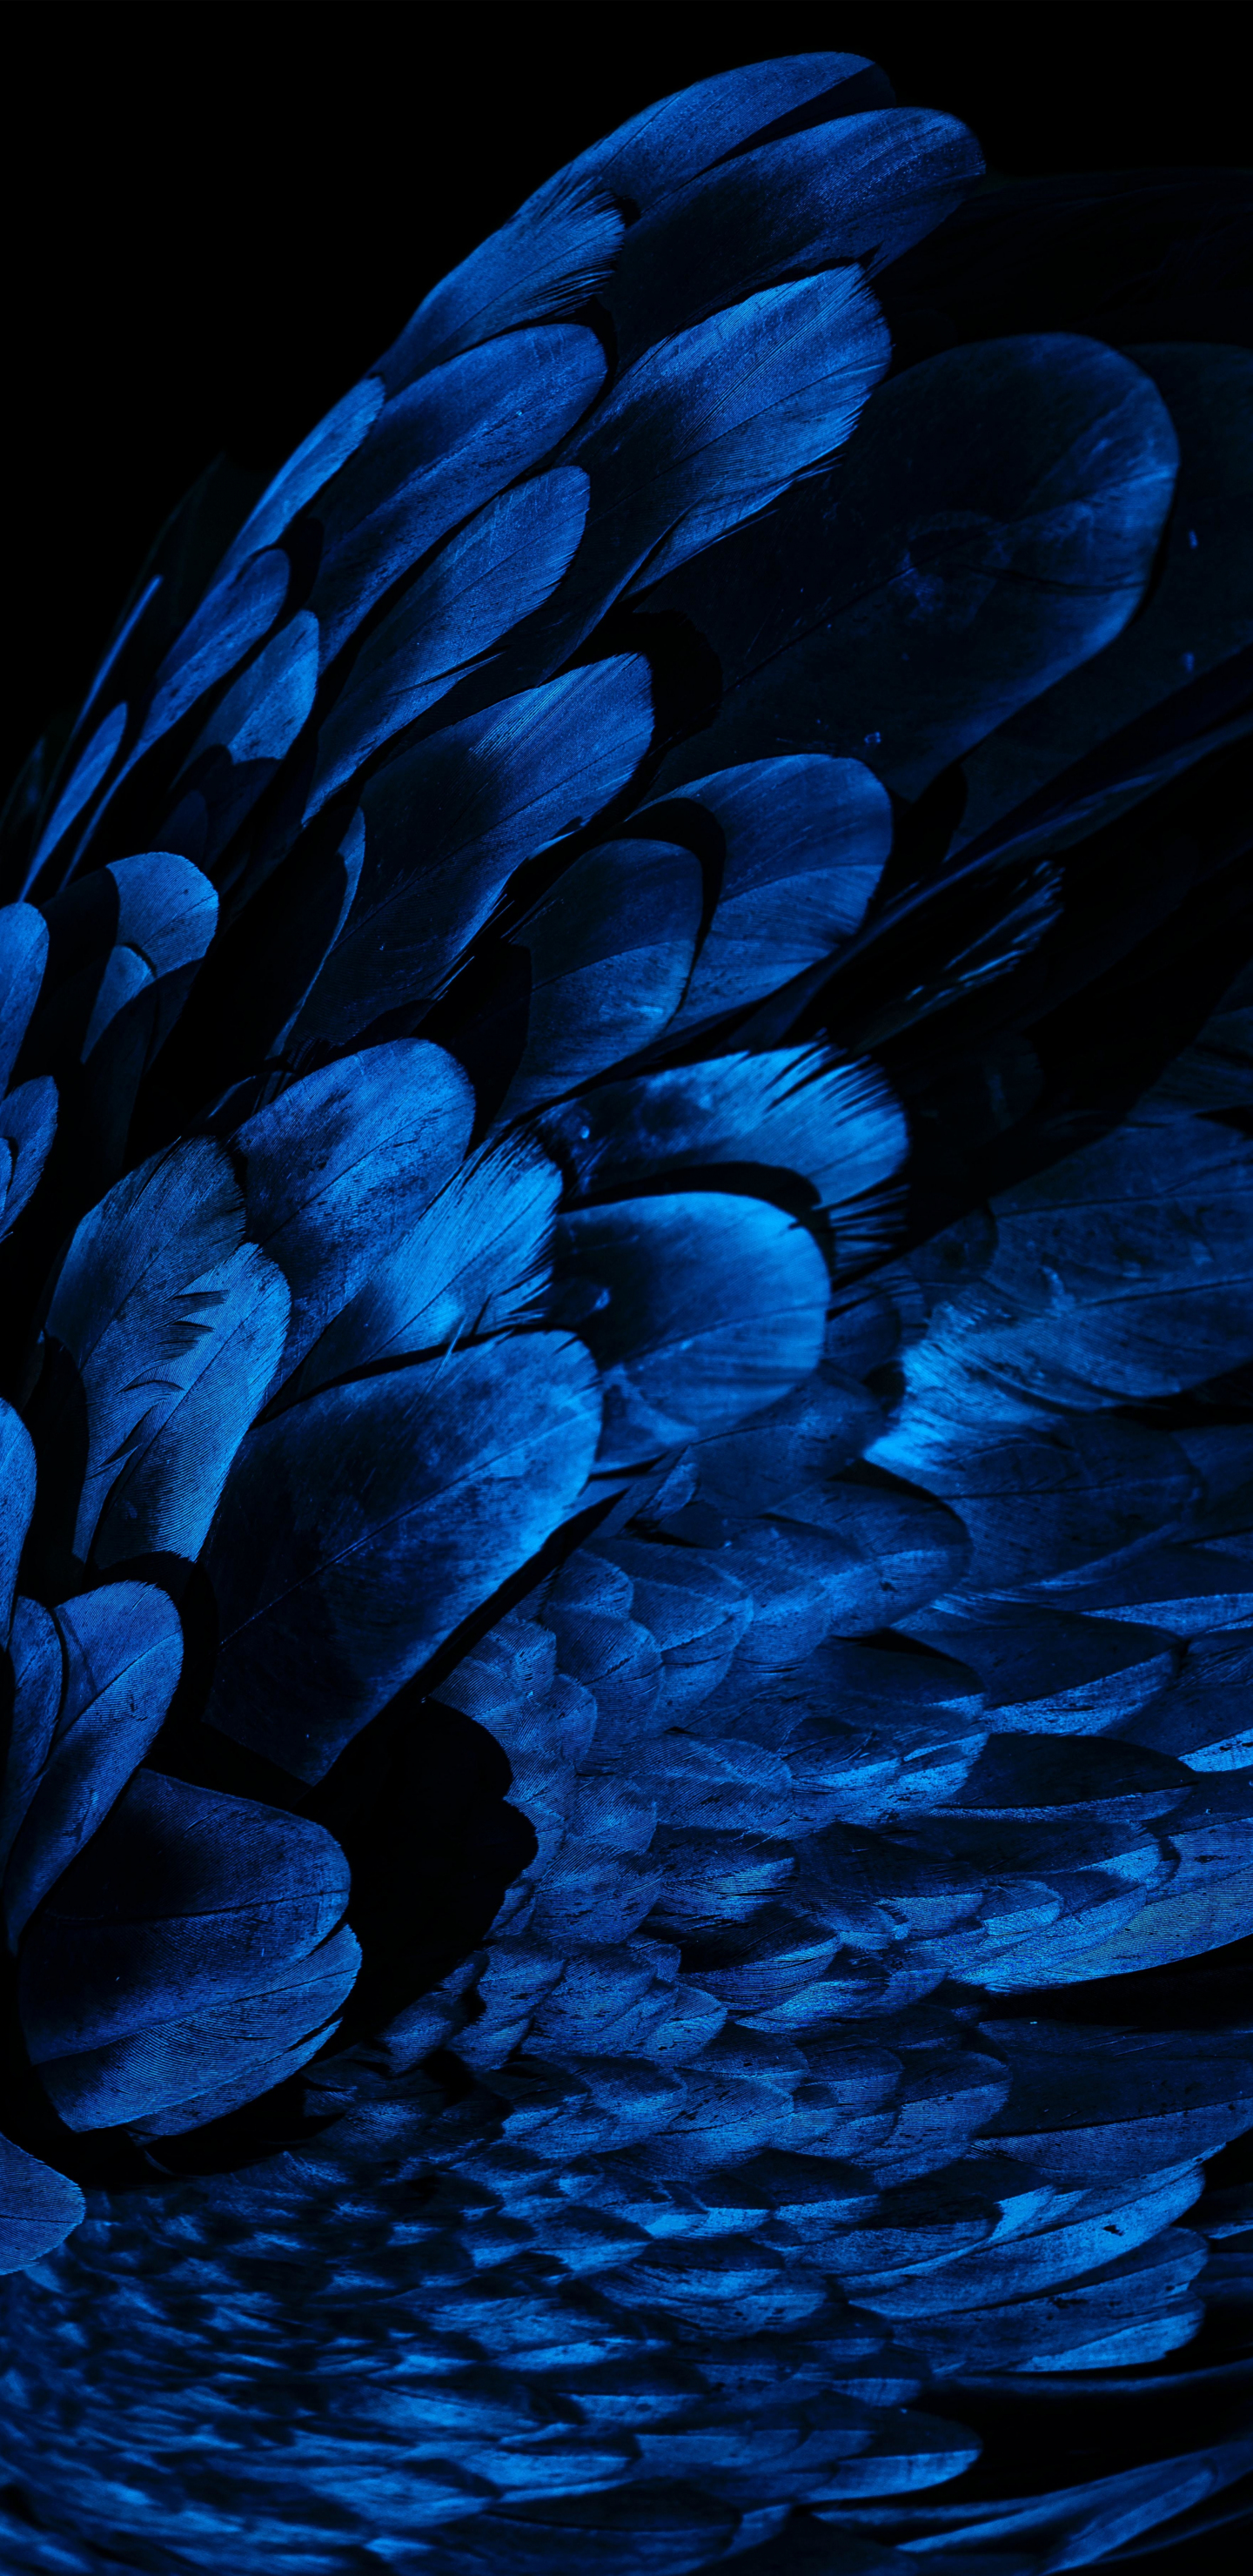 Download wallpaper 1440x2960 feathers, bird wing, blue feathers, close up,  samsung galaxy s8, samsung galaxy s8 plus, 1440x2960 hd background, 24602